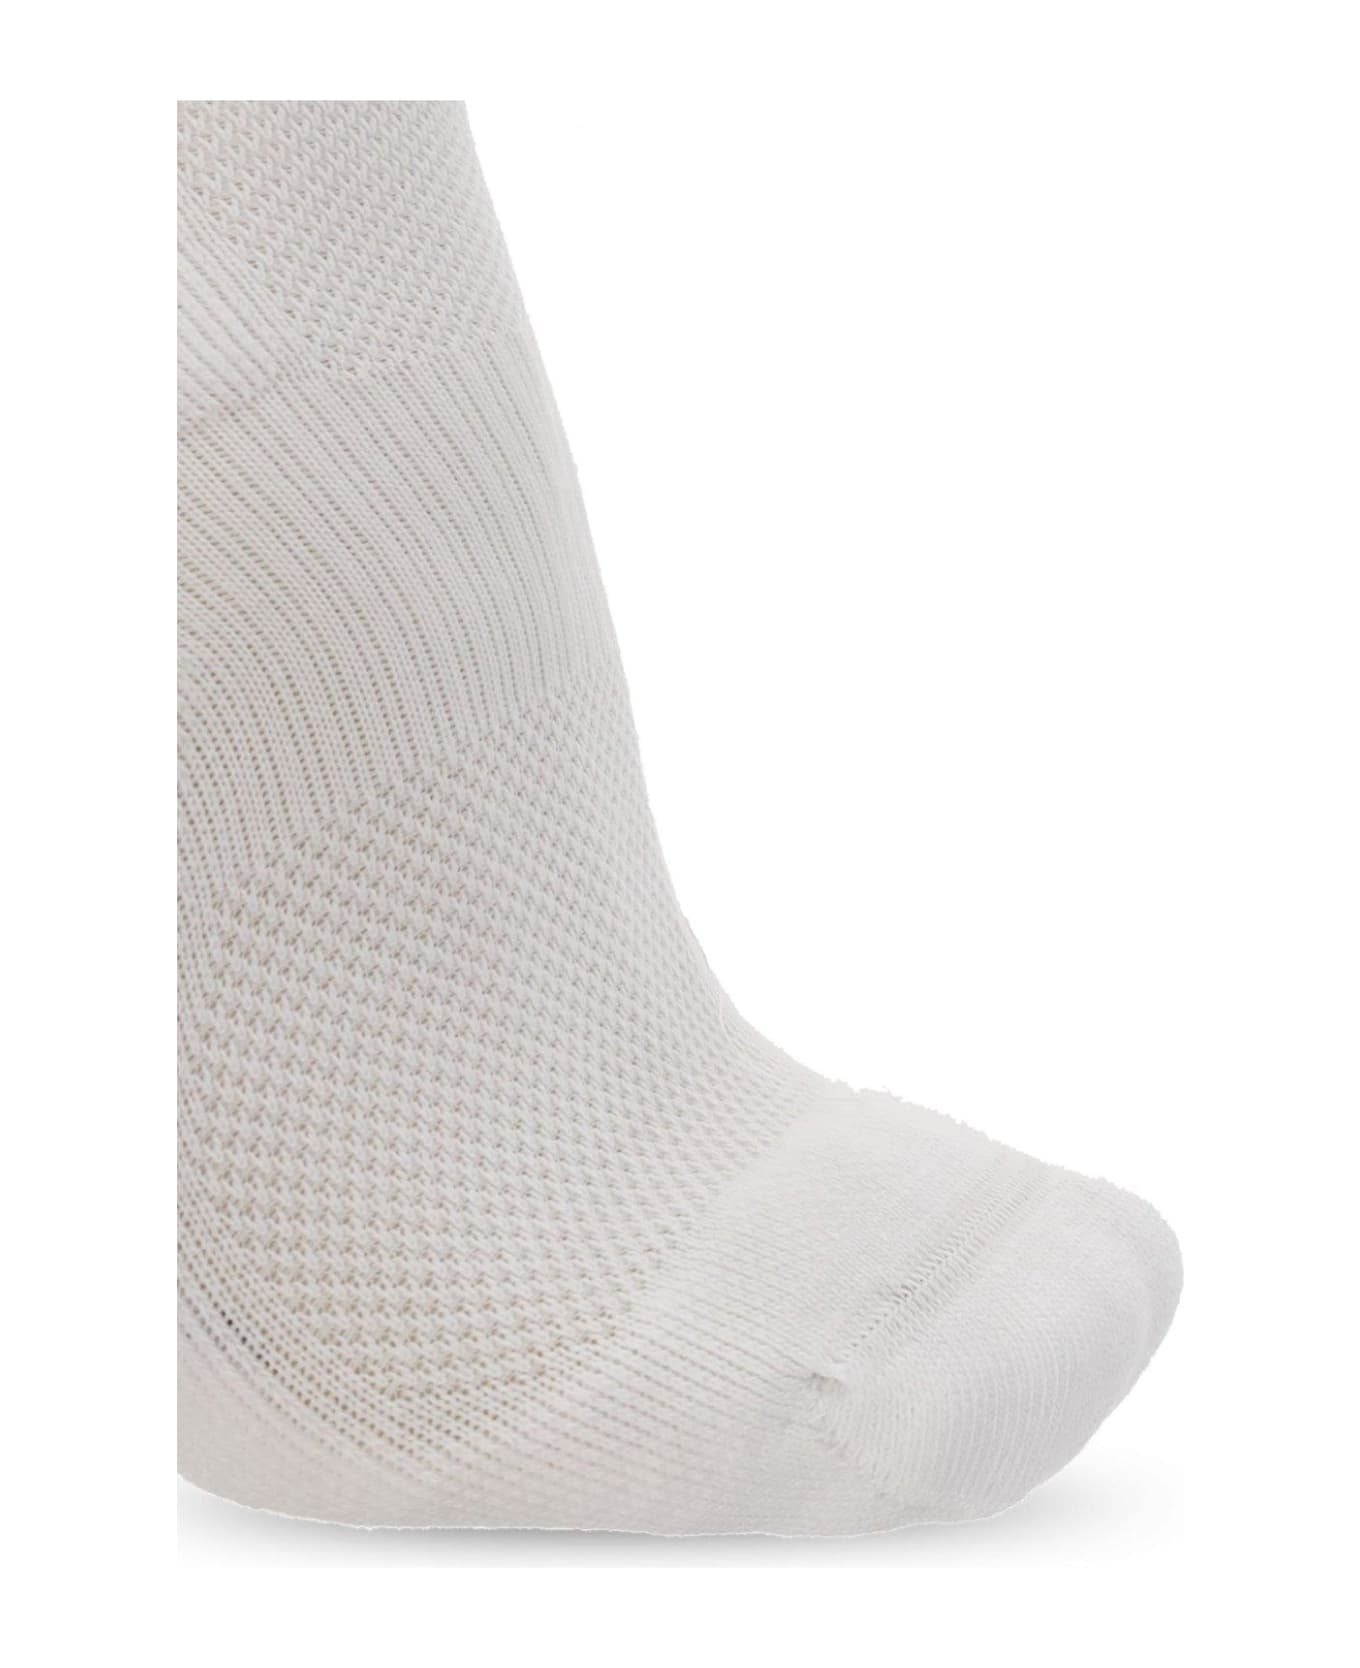 Gucci Interlocking G Stretched Ankle Socks - White 靴下